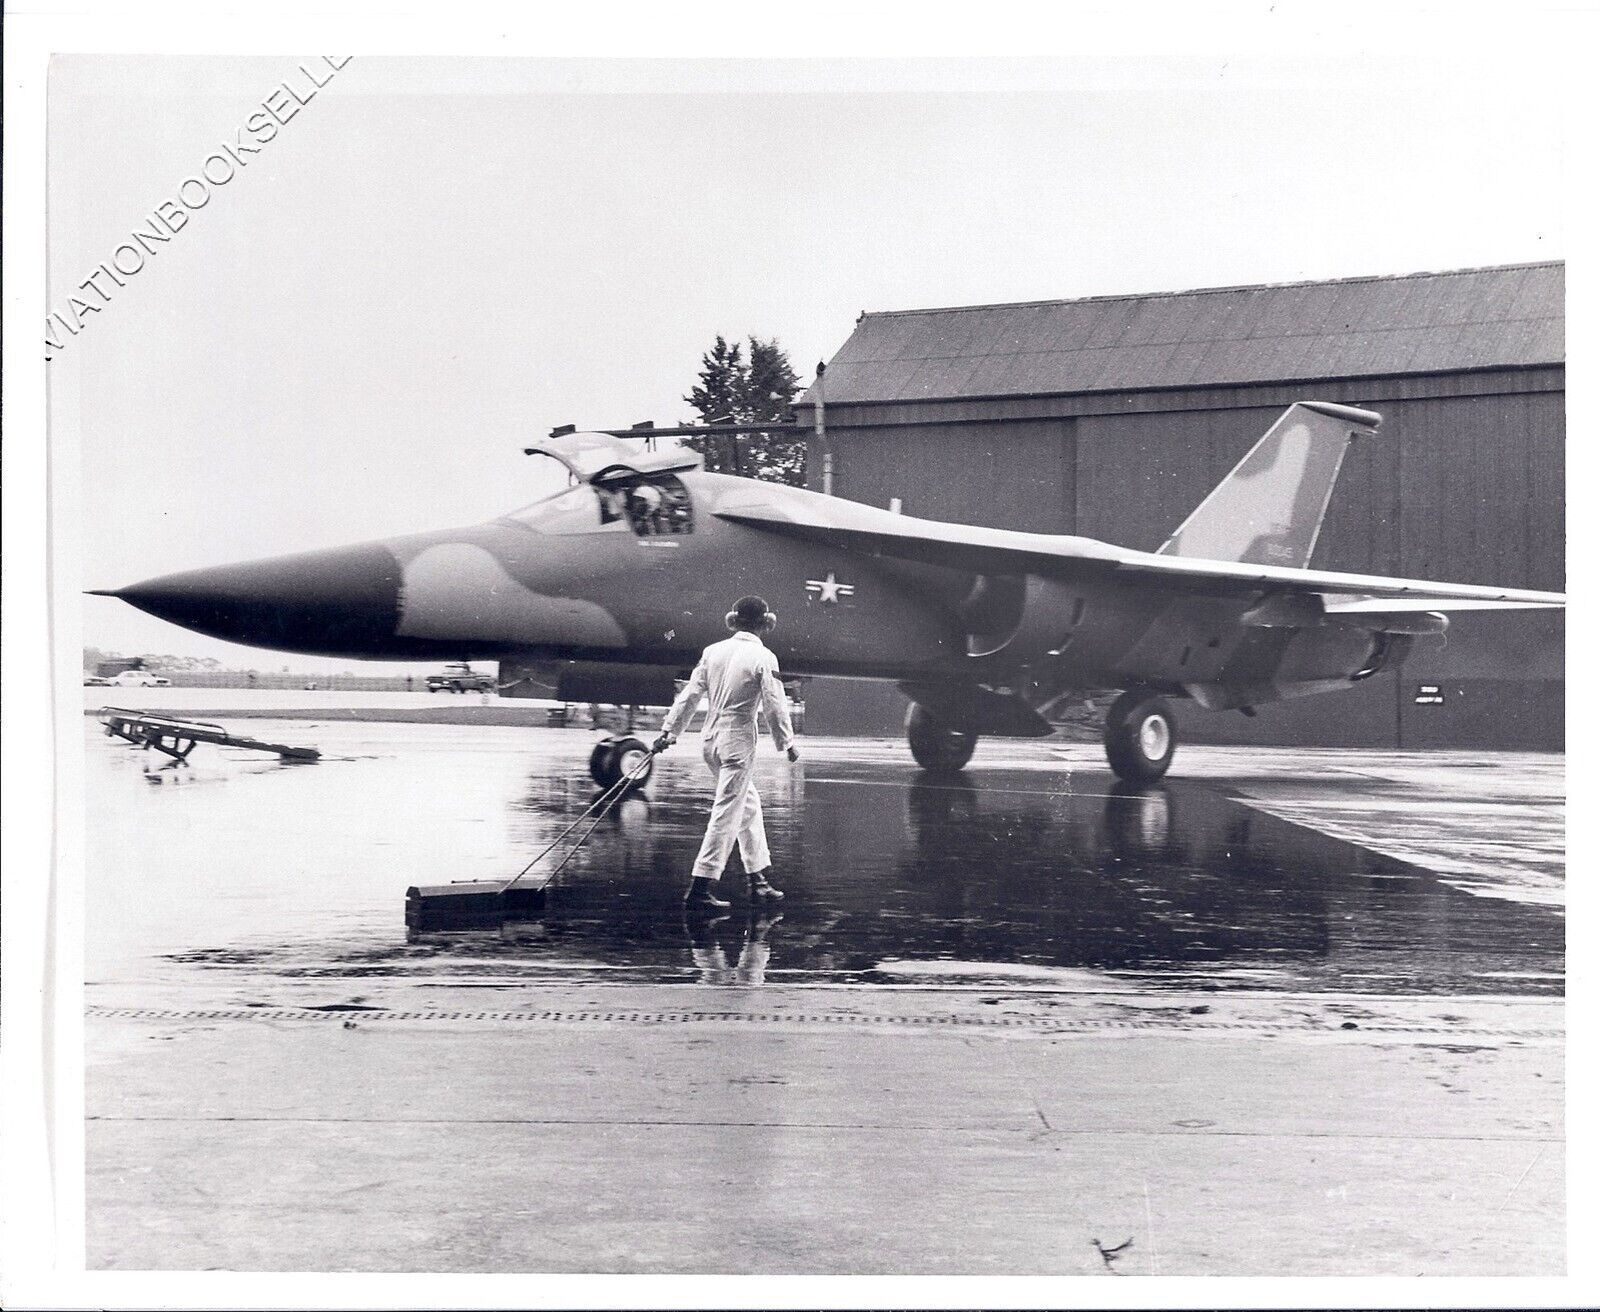 Original Vintage Photo: General Dynamics F-111 TACTICAL AIR COMMAND CAMOUFLAGE